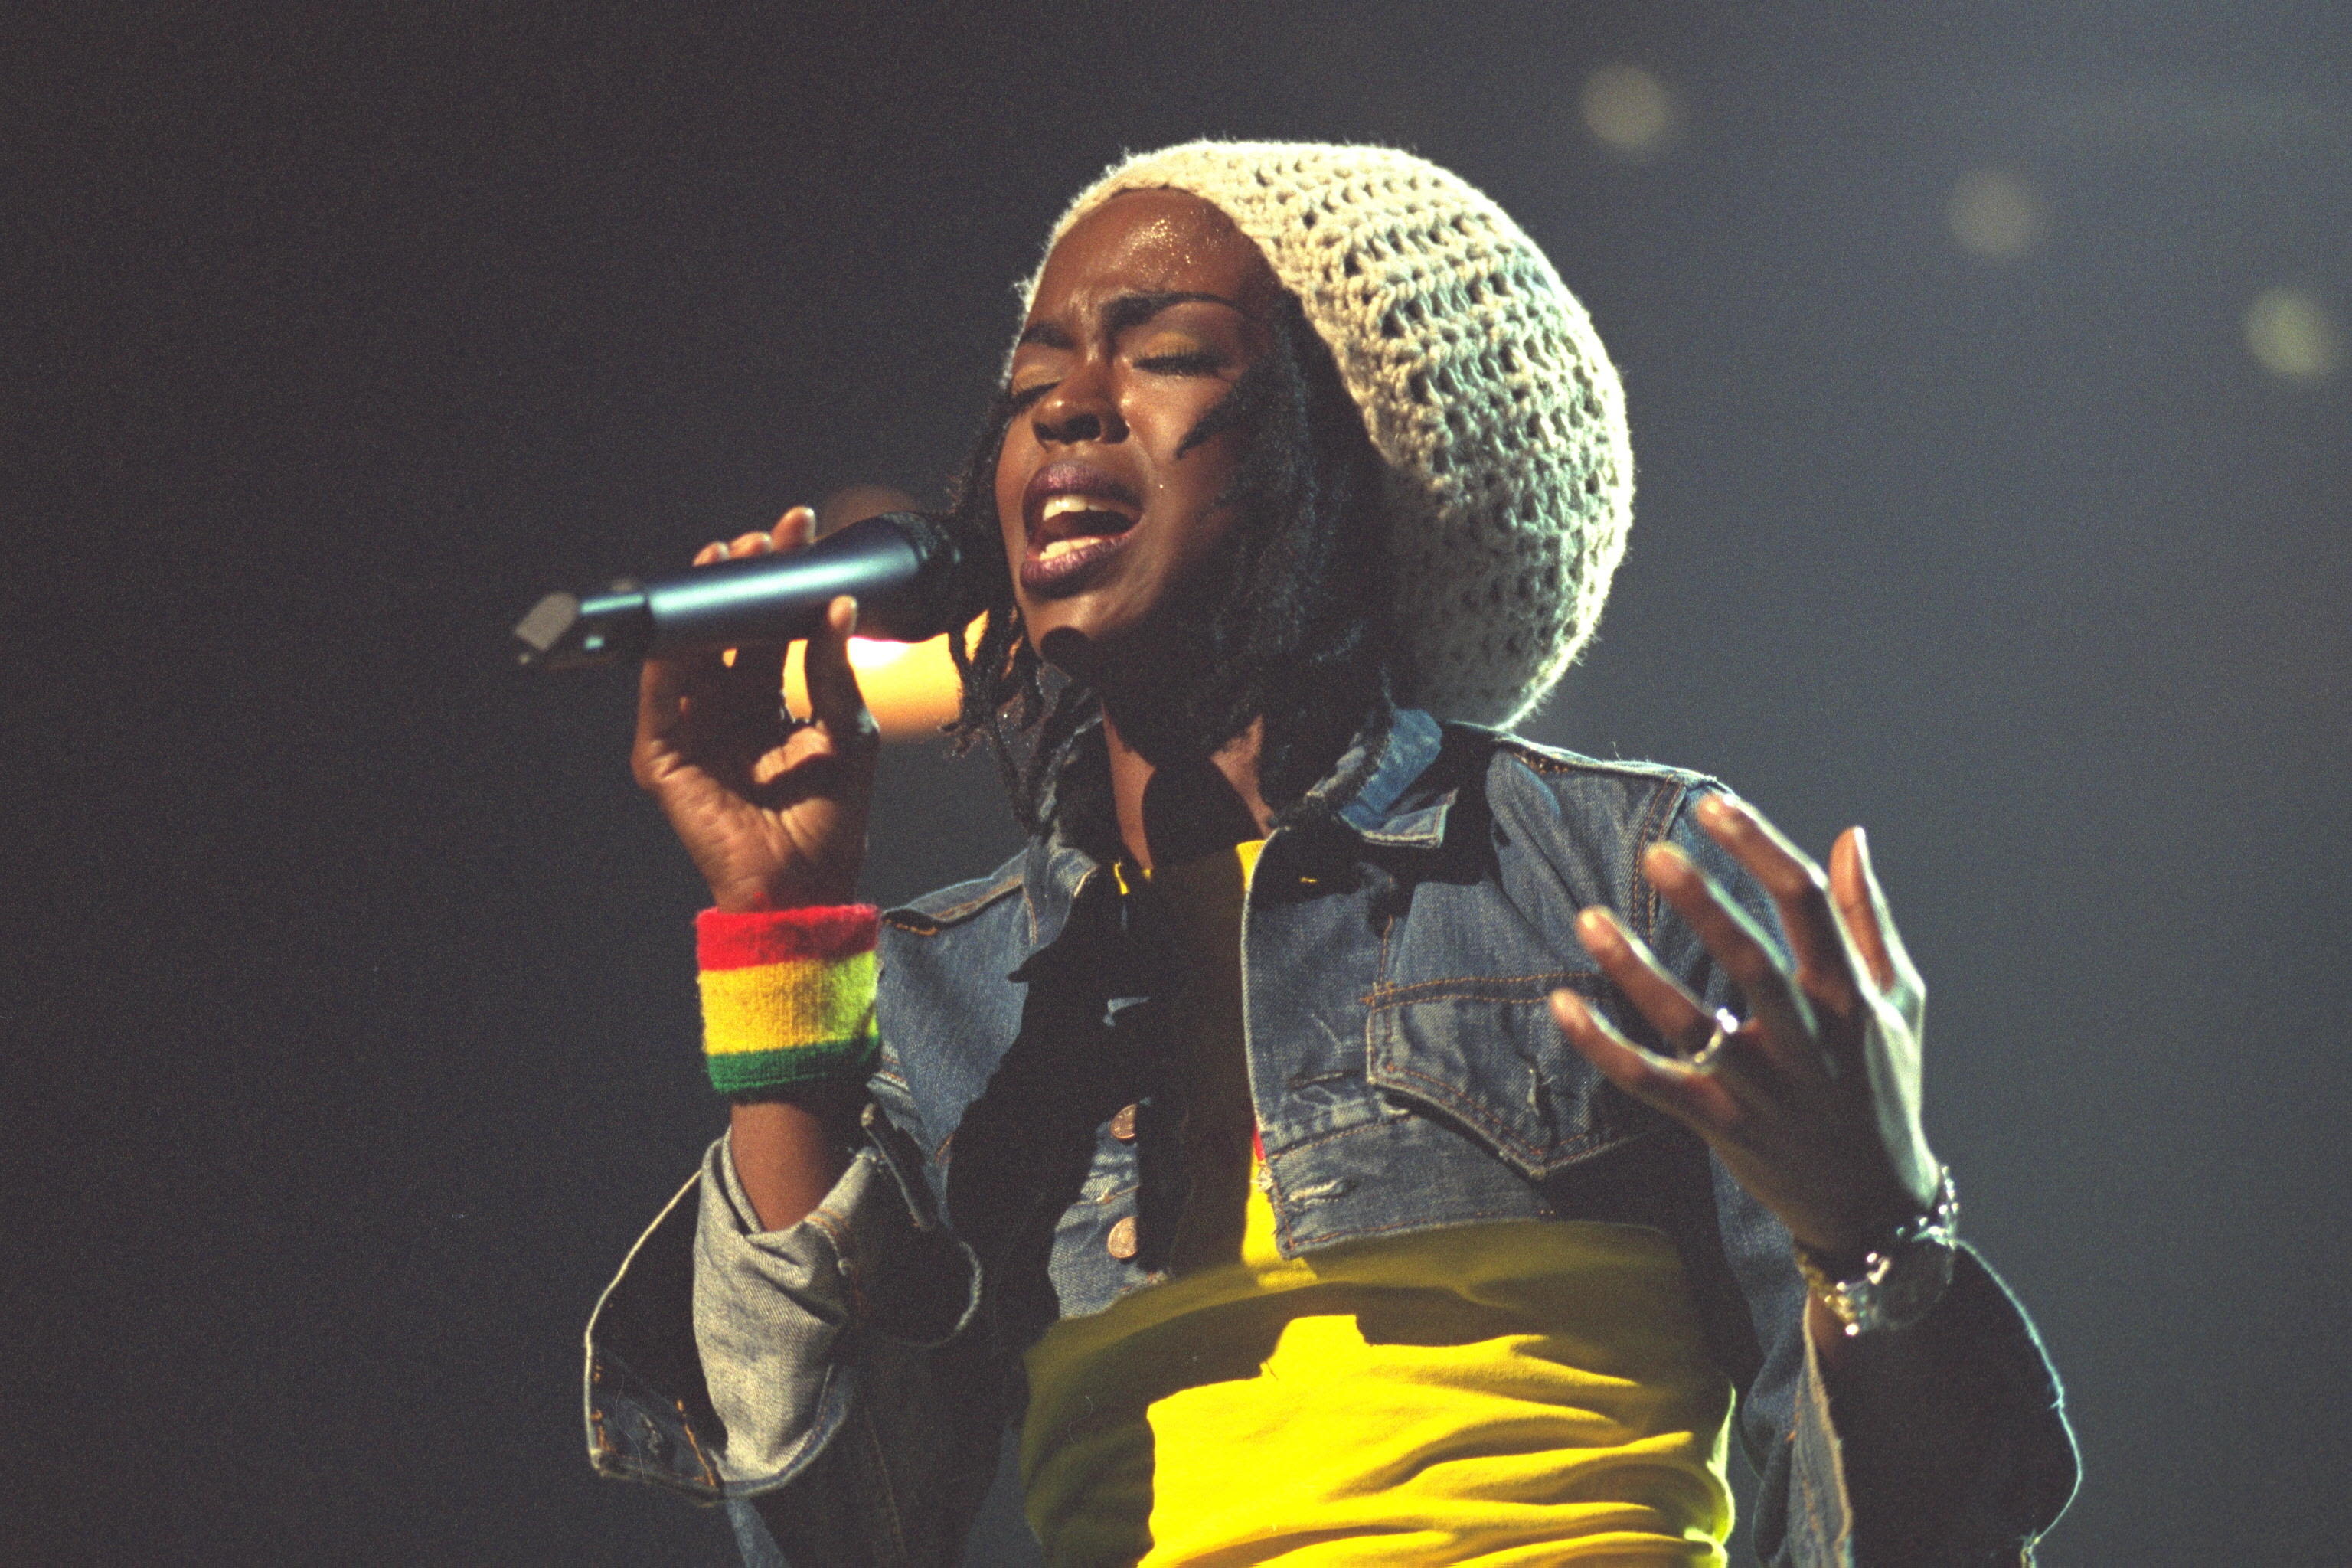 Roll over Beatles. Lauryn Hill tops Apple Music's list of top 100 albums.